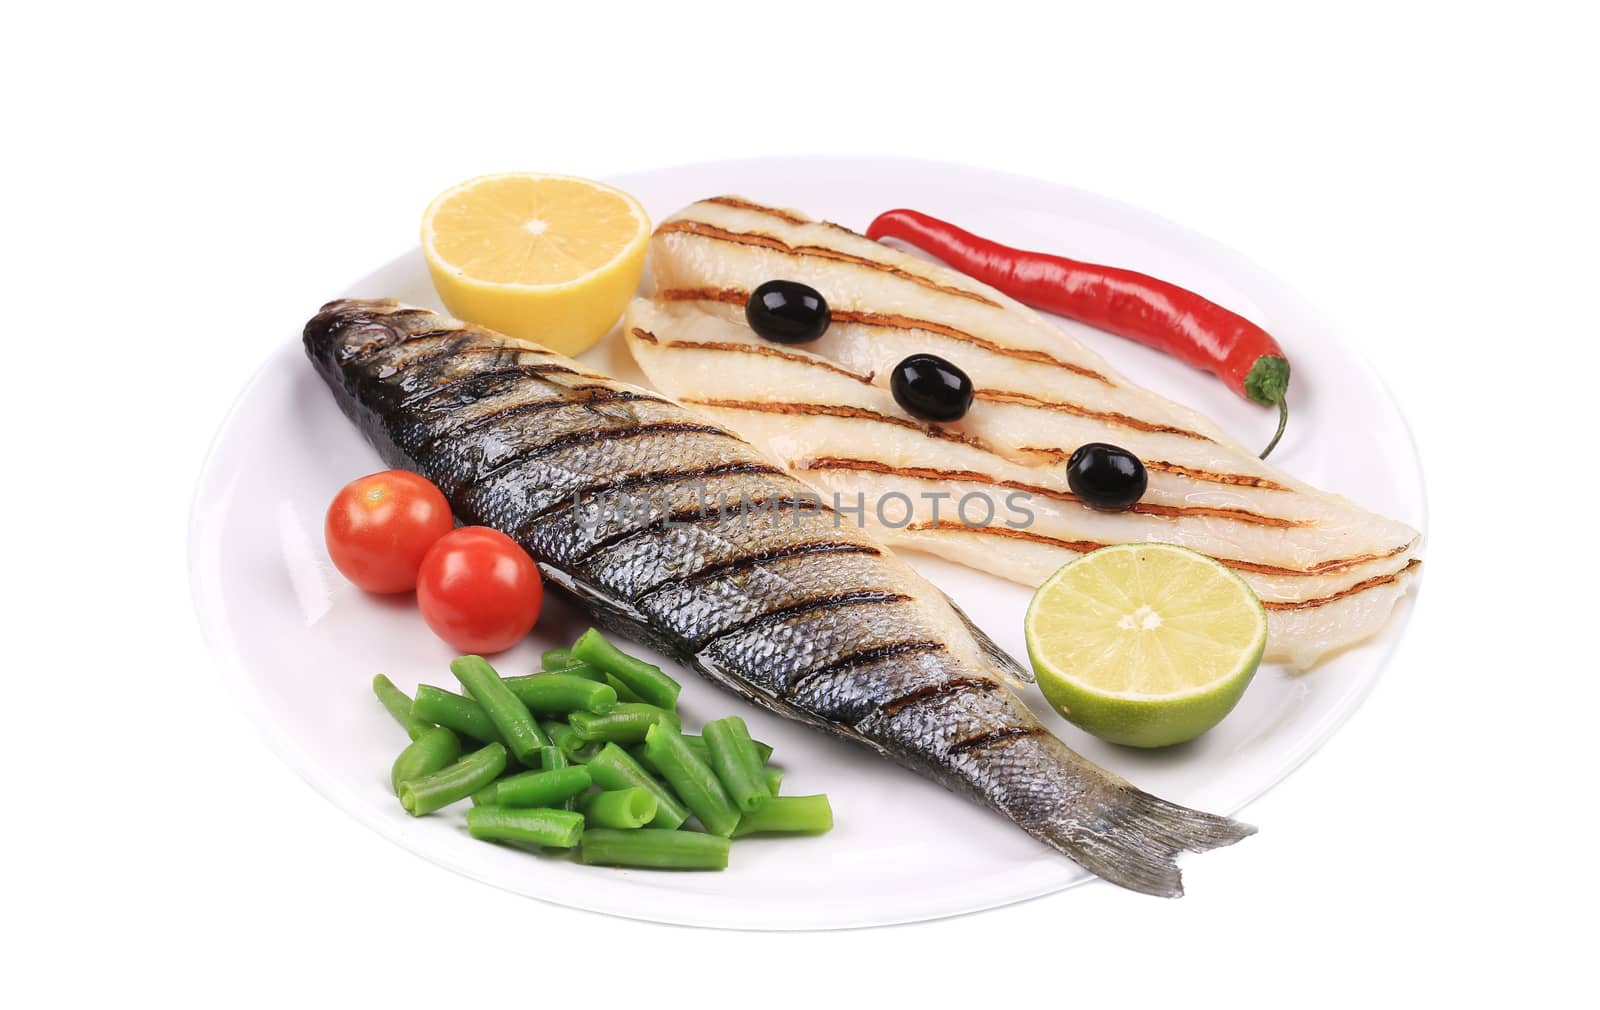 Fish and vegetables. Isolated on a white background.